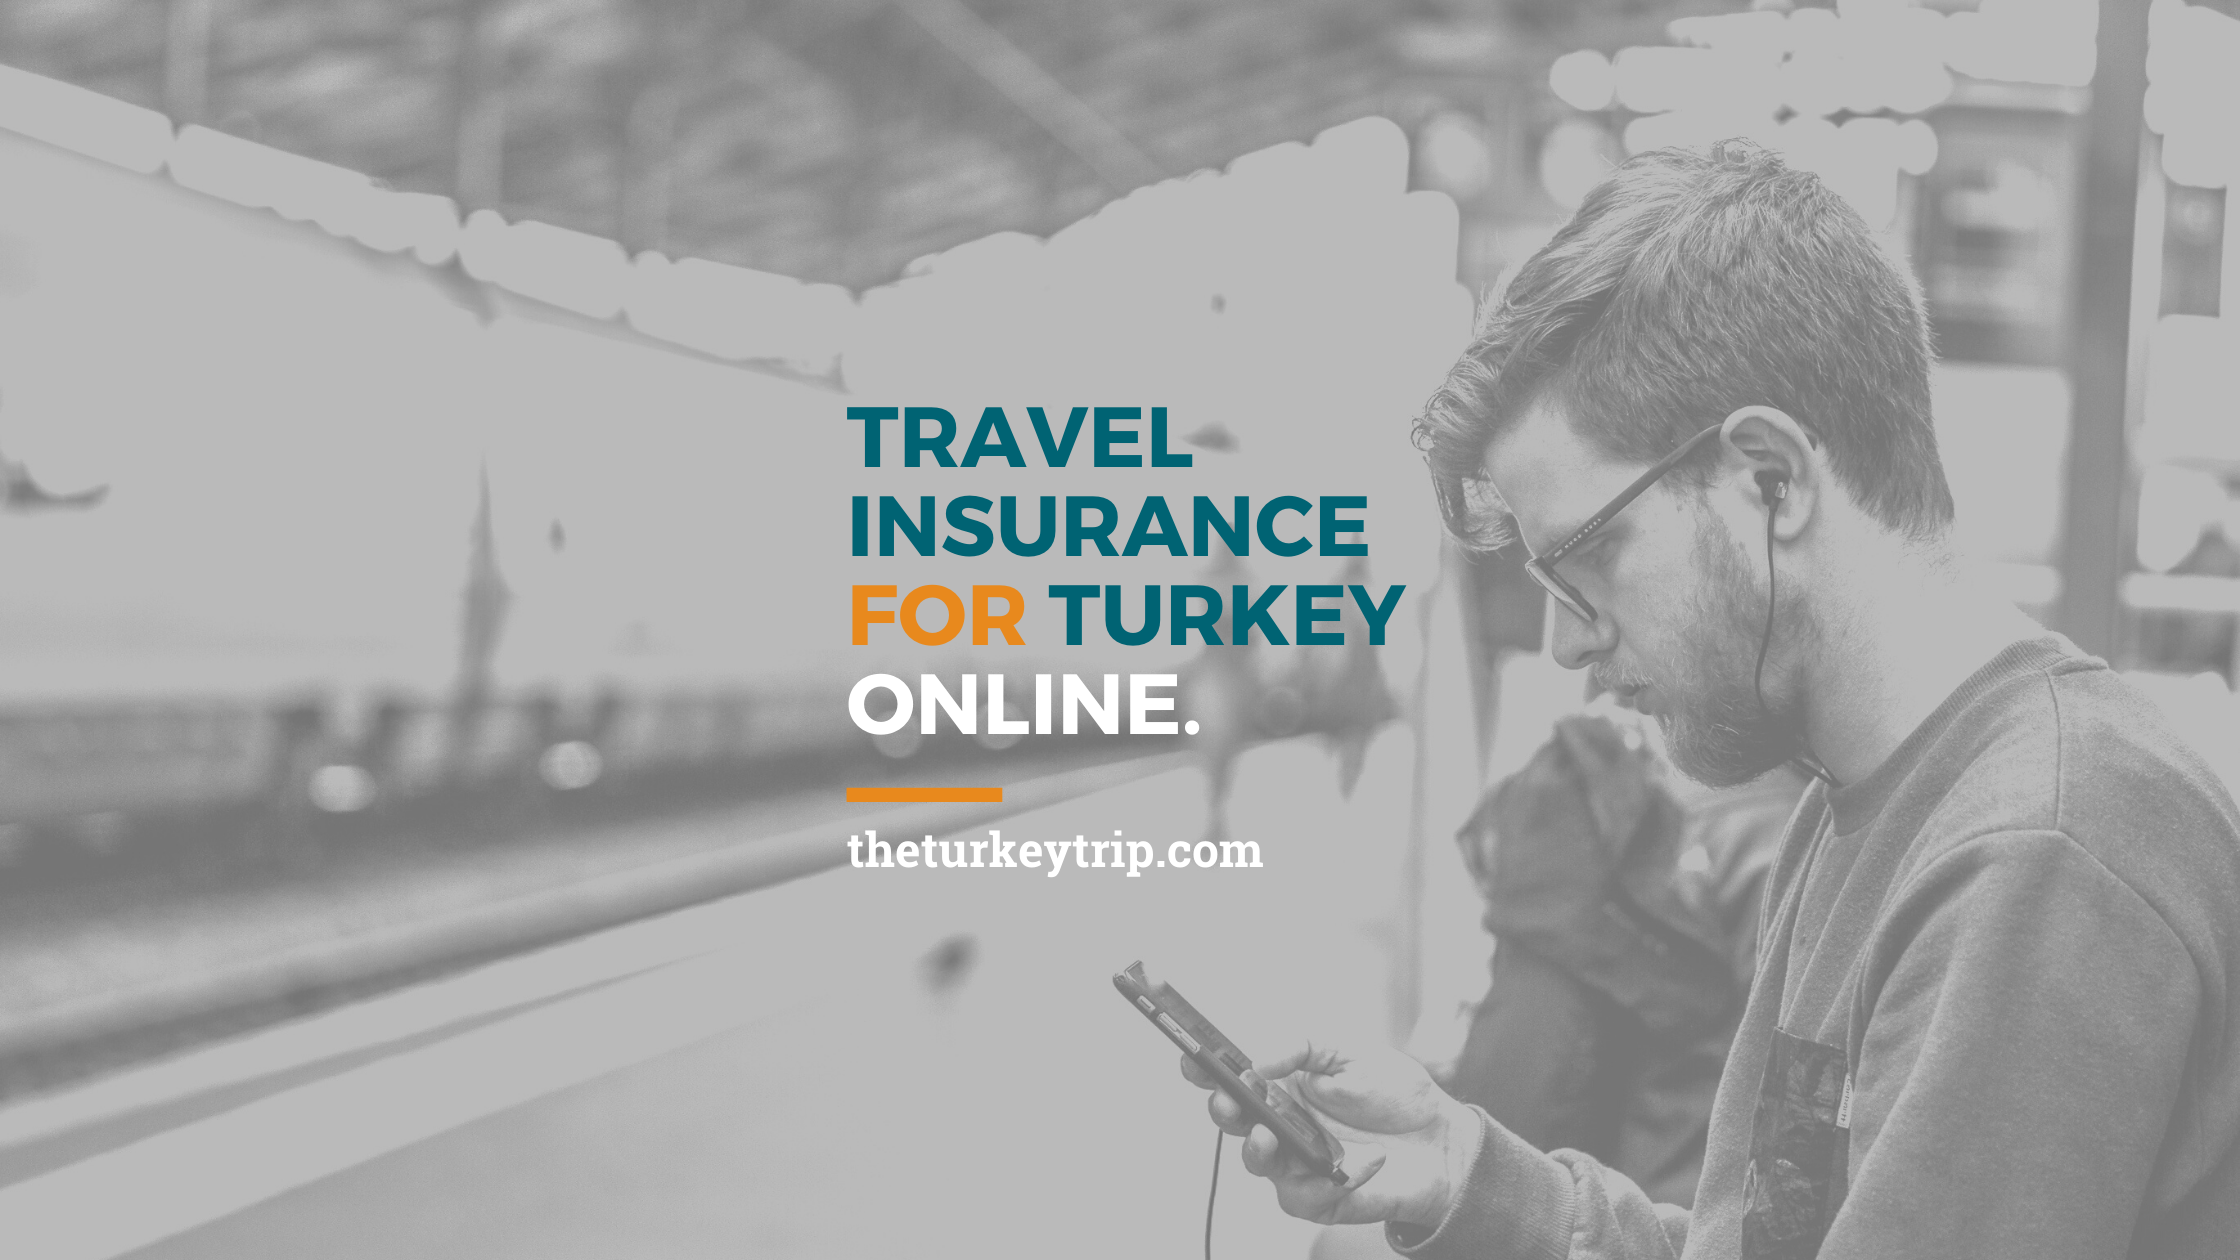 Holiday Travel Insurance For Turkey Online